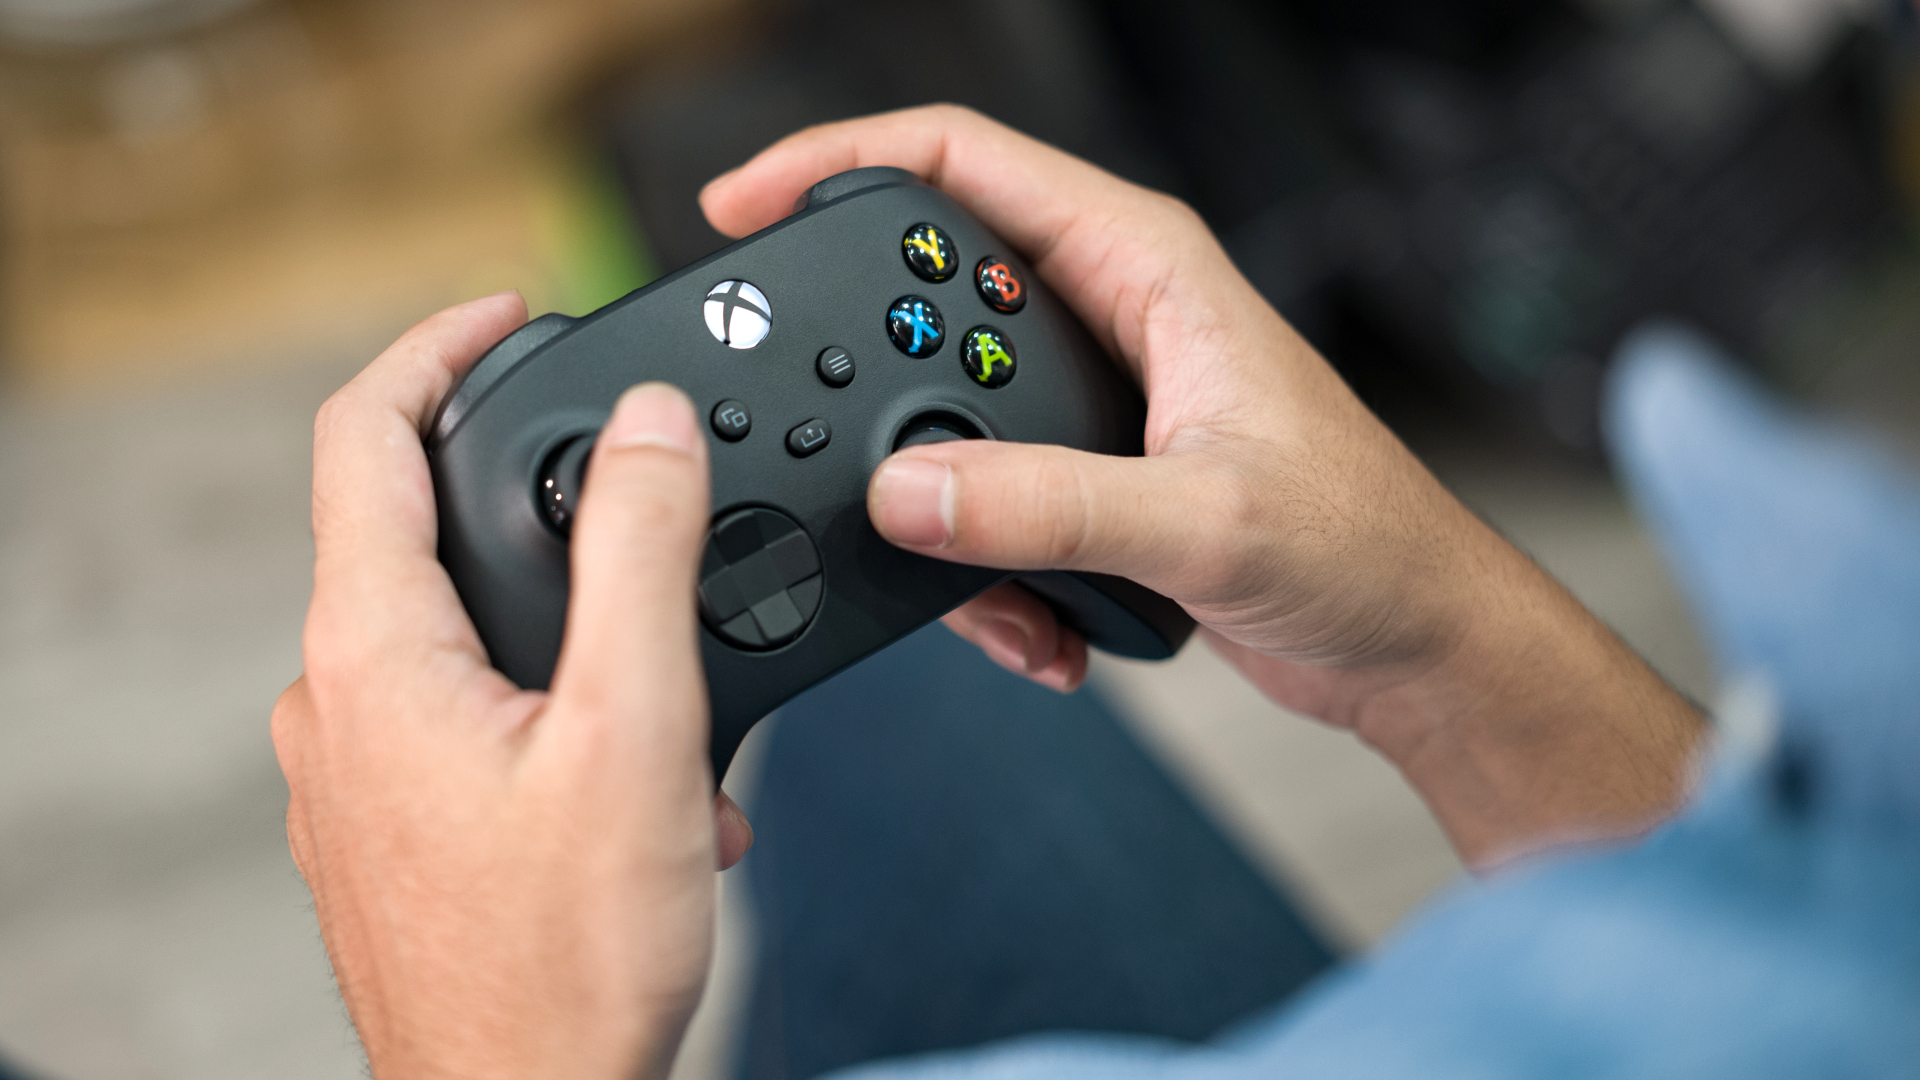 One Xbox Series X controller held in two hands